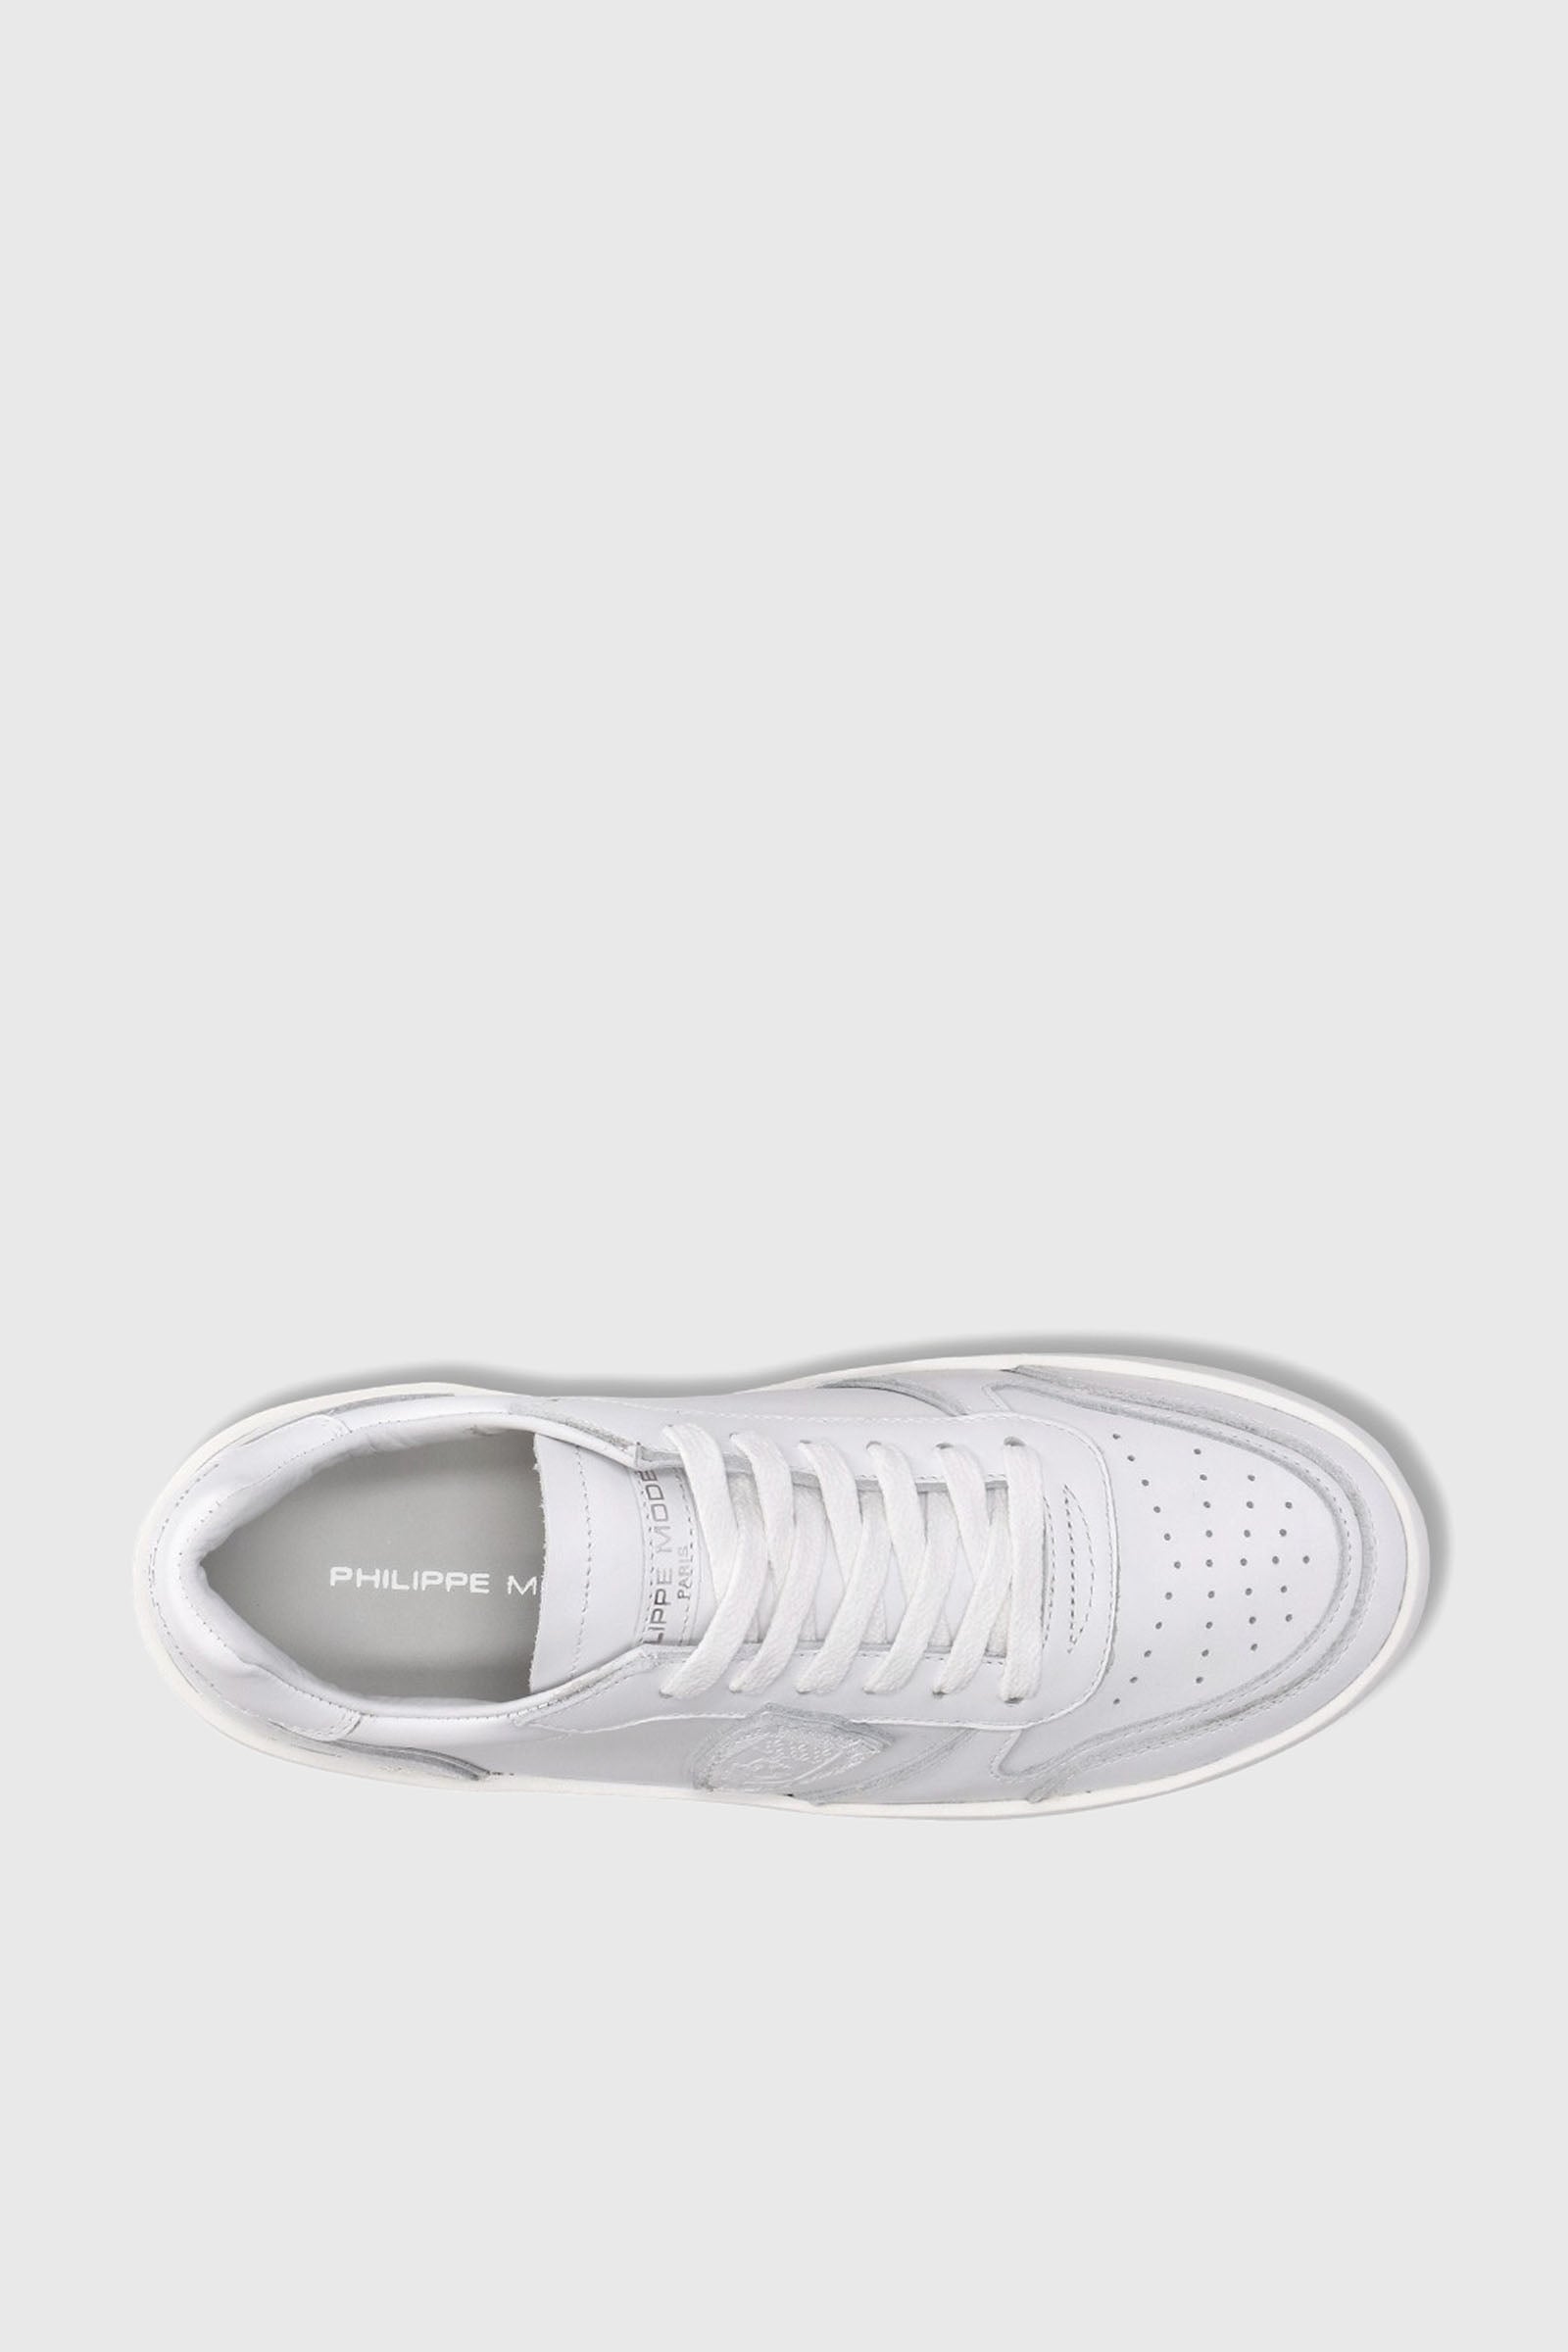 Philippe Model Sneaker Nice Veau Leather White - 4